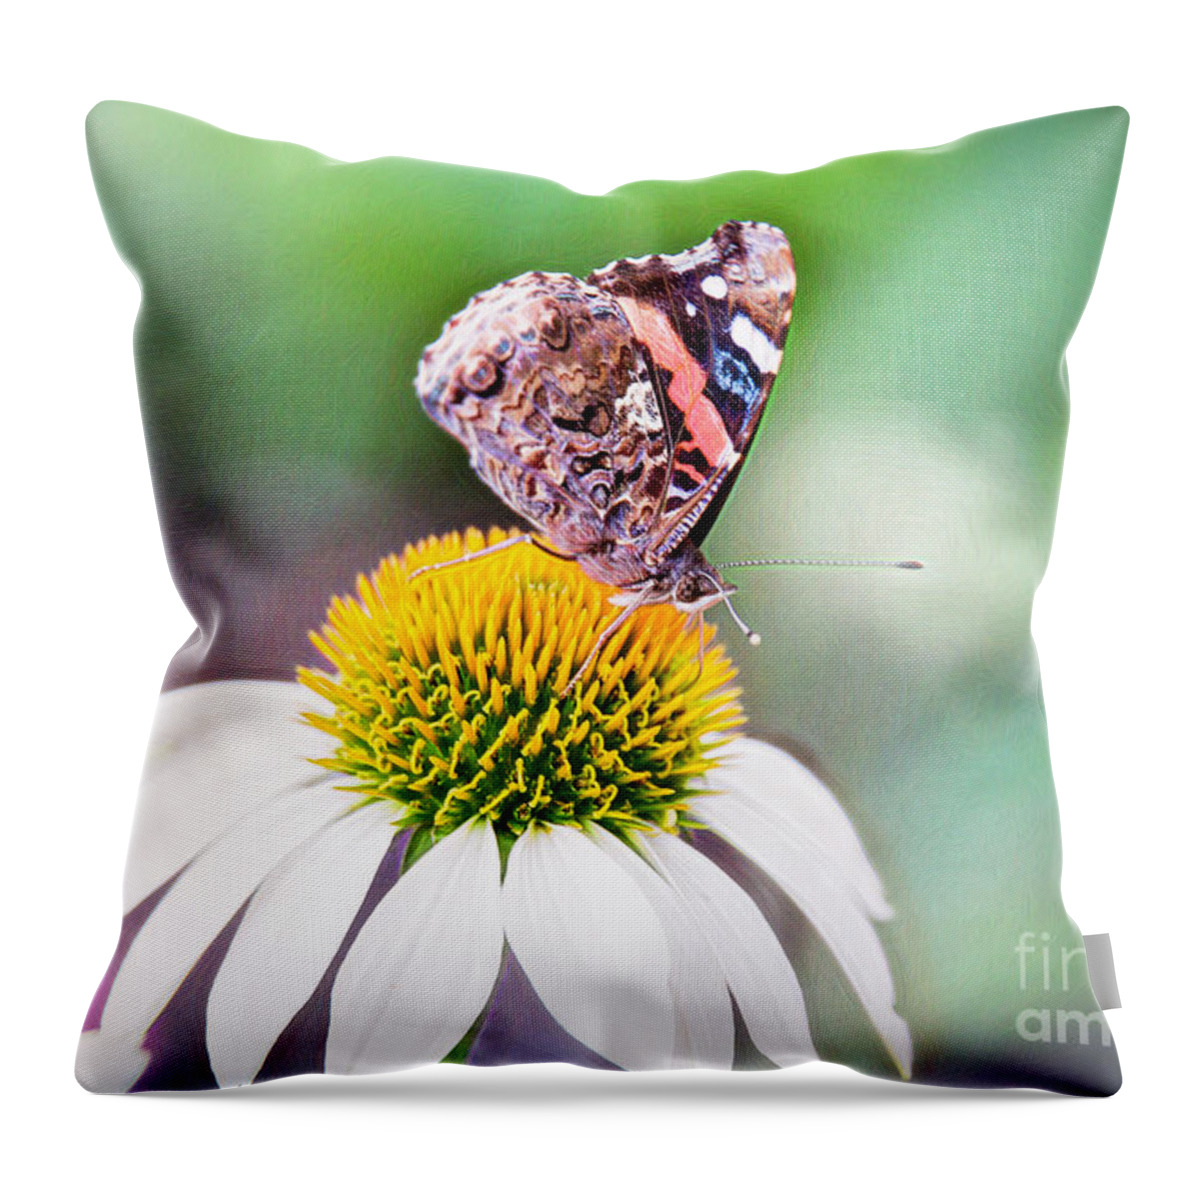 Nature Throw Pillow featuring the photograph Red Admiral Butterfly On Coneflower by Sharon McConnell